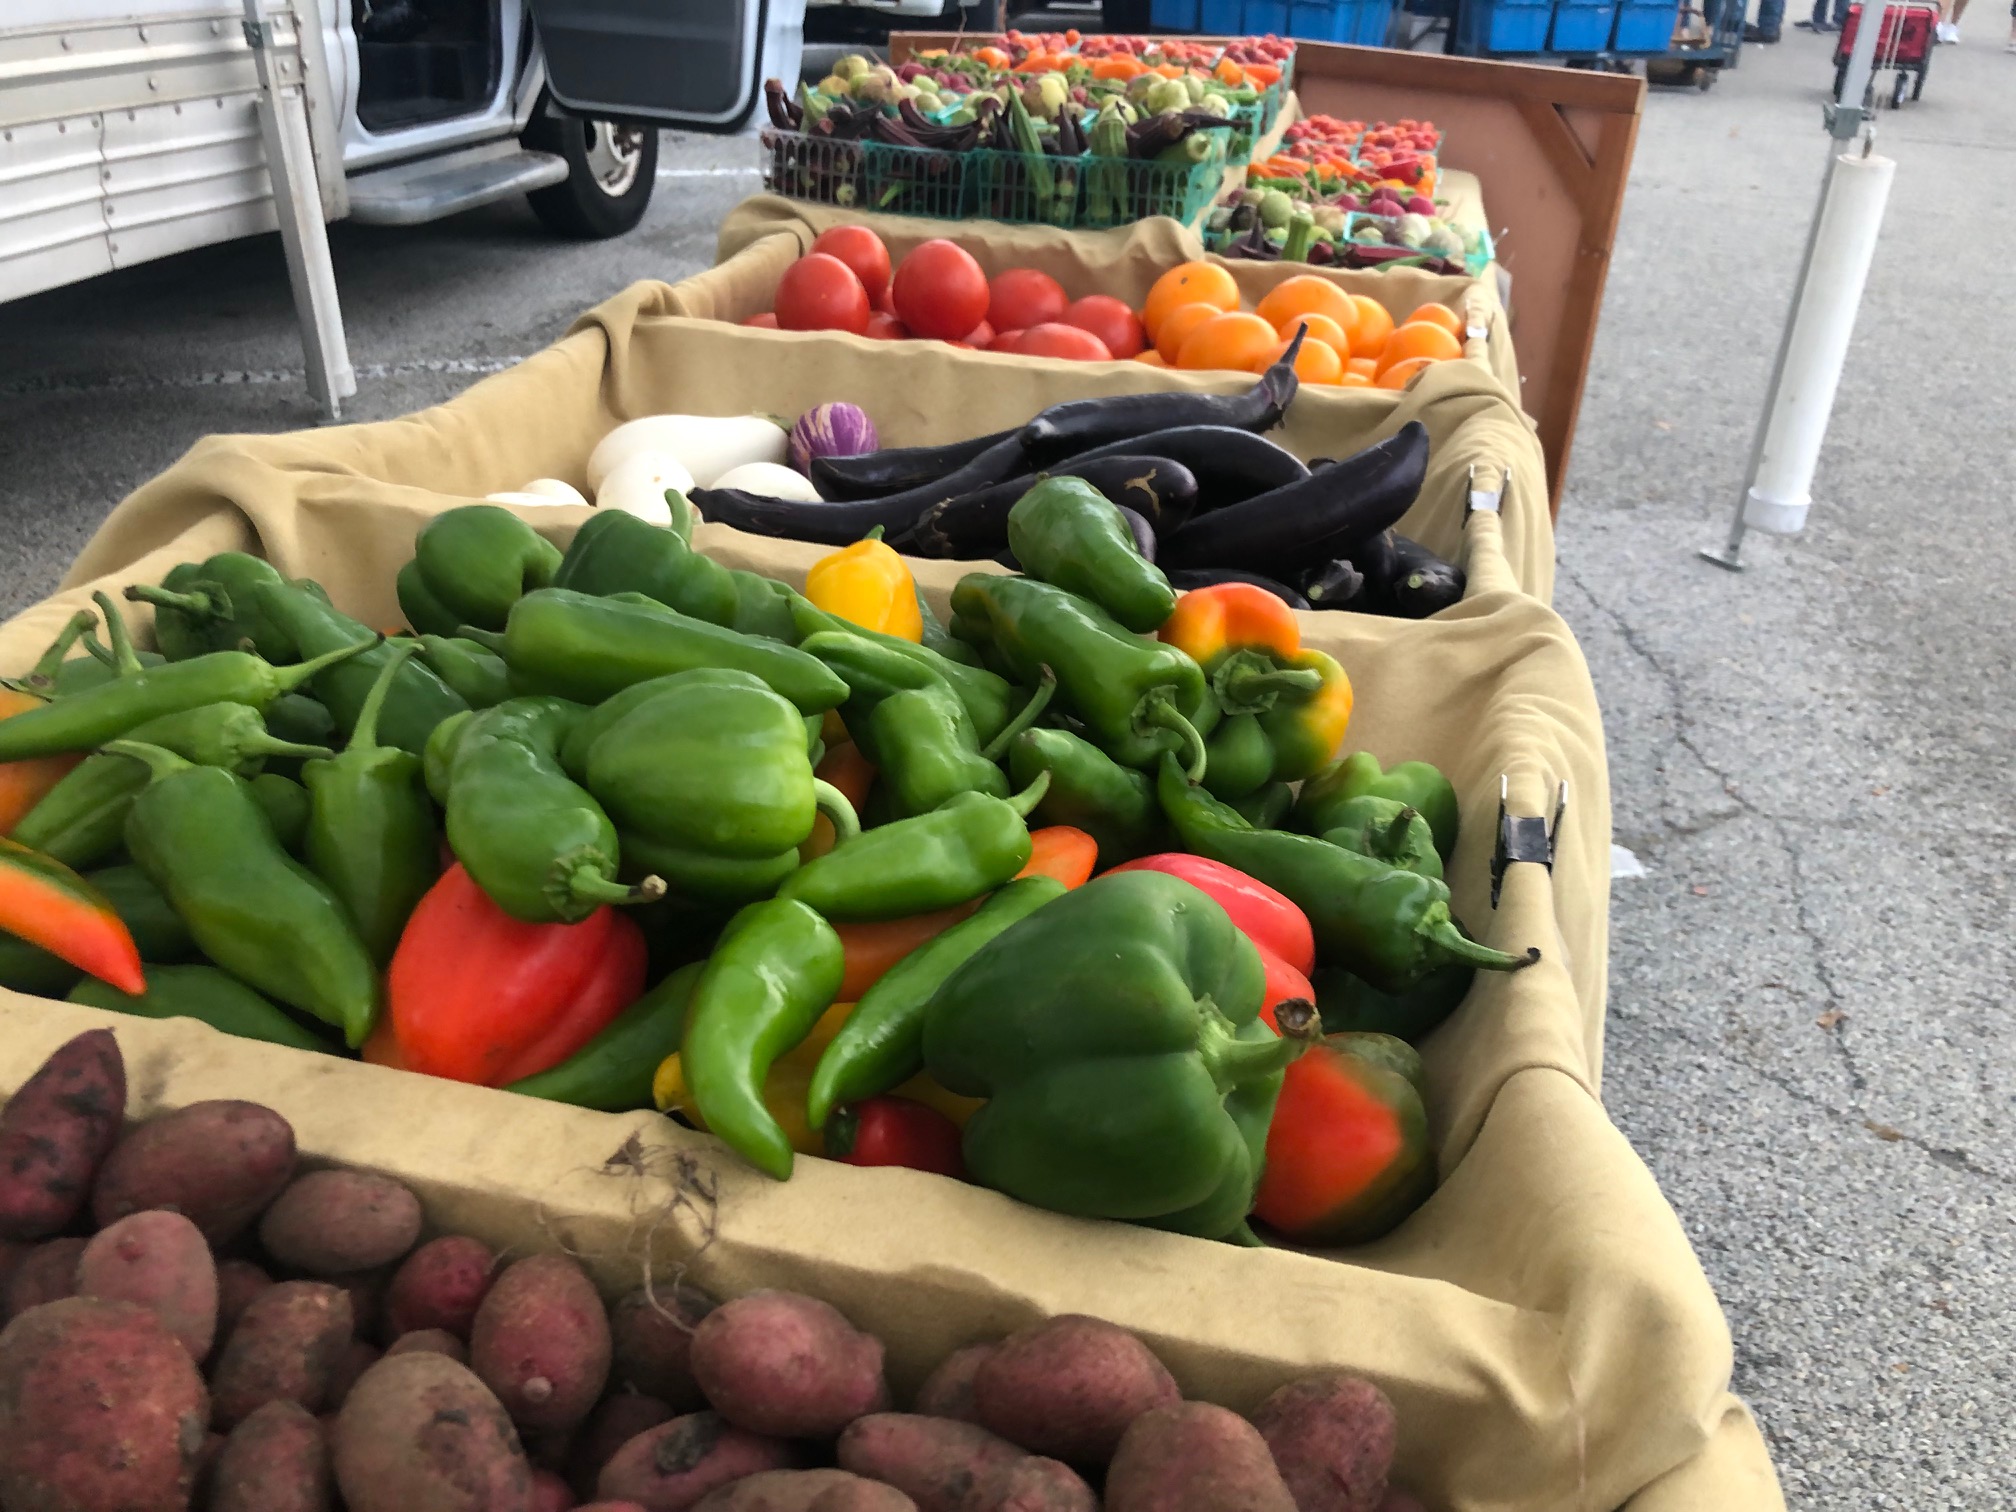 A side view of the Sola Gratia farm stand at the Champaign farmers' market shows bell peppers, peppers, and potatoes. Photo by Alyssa Buckley.